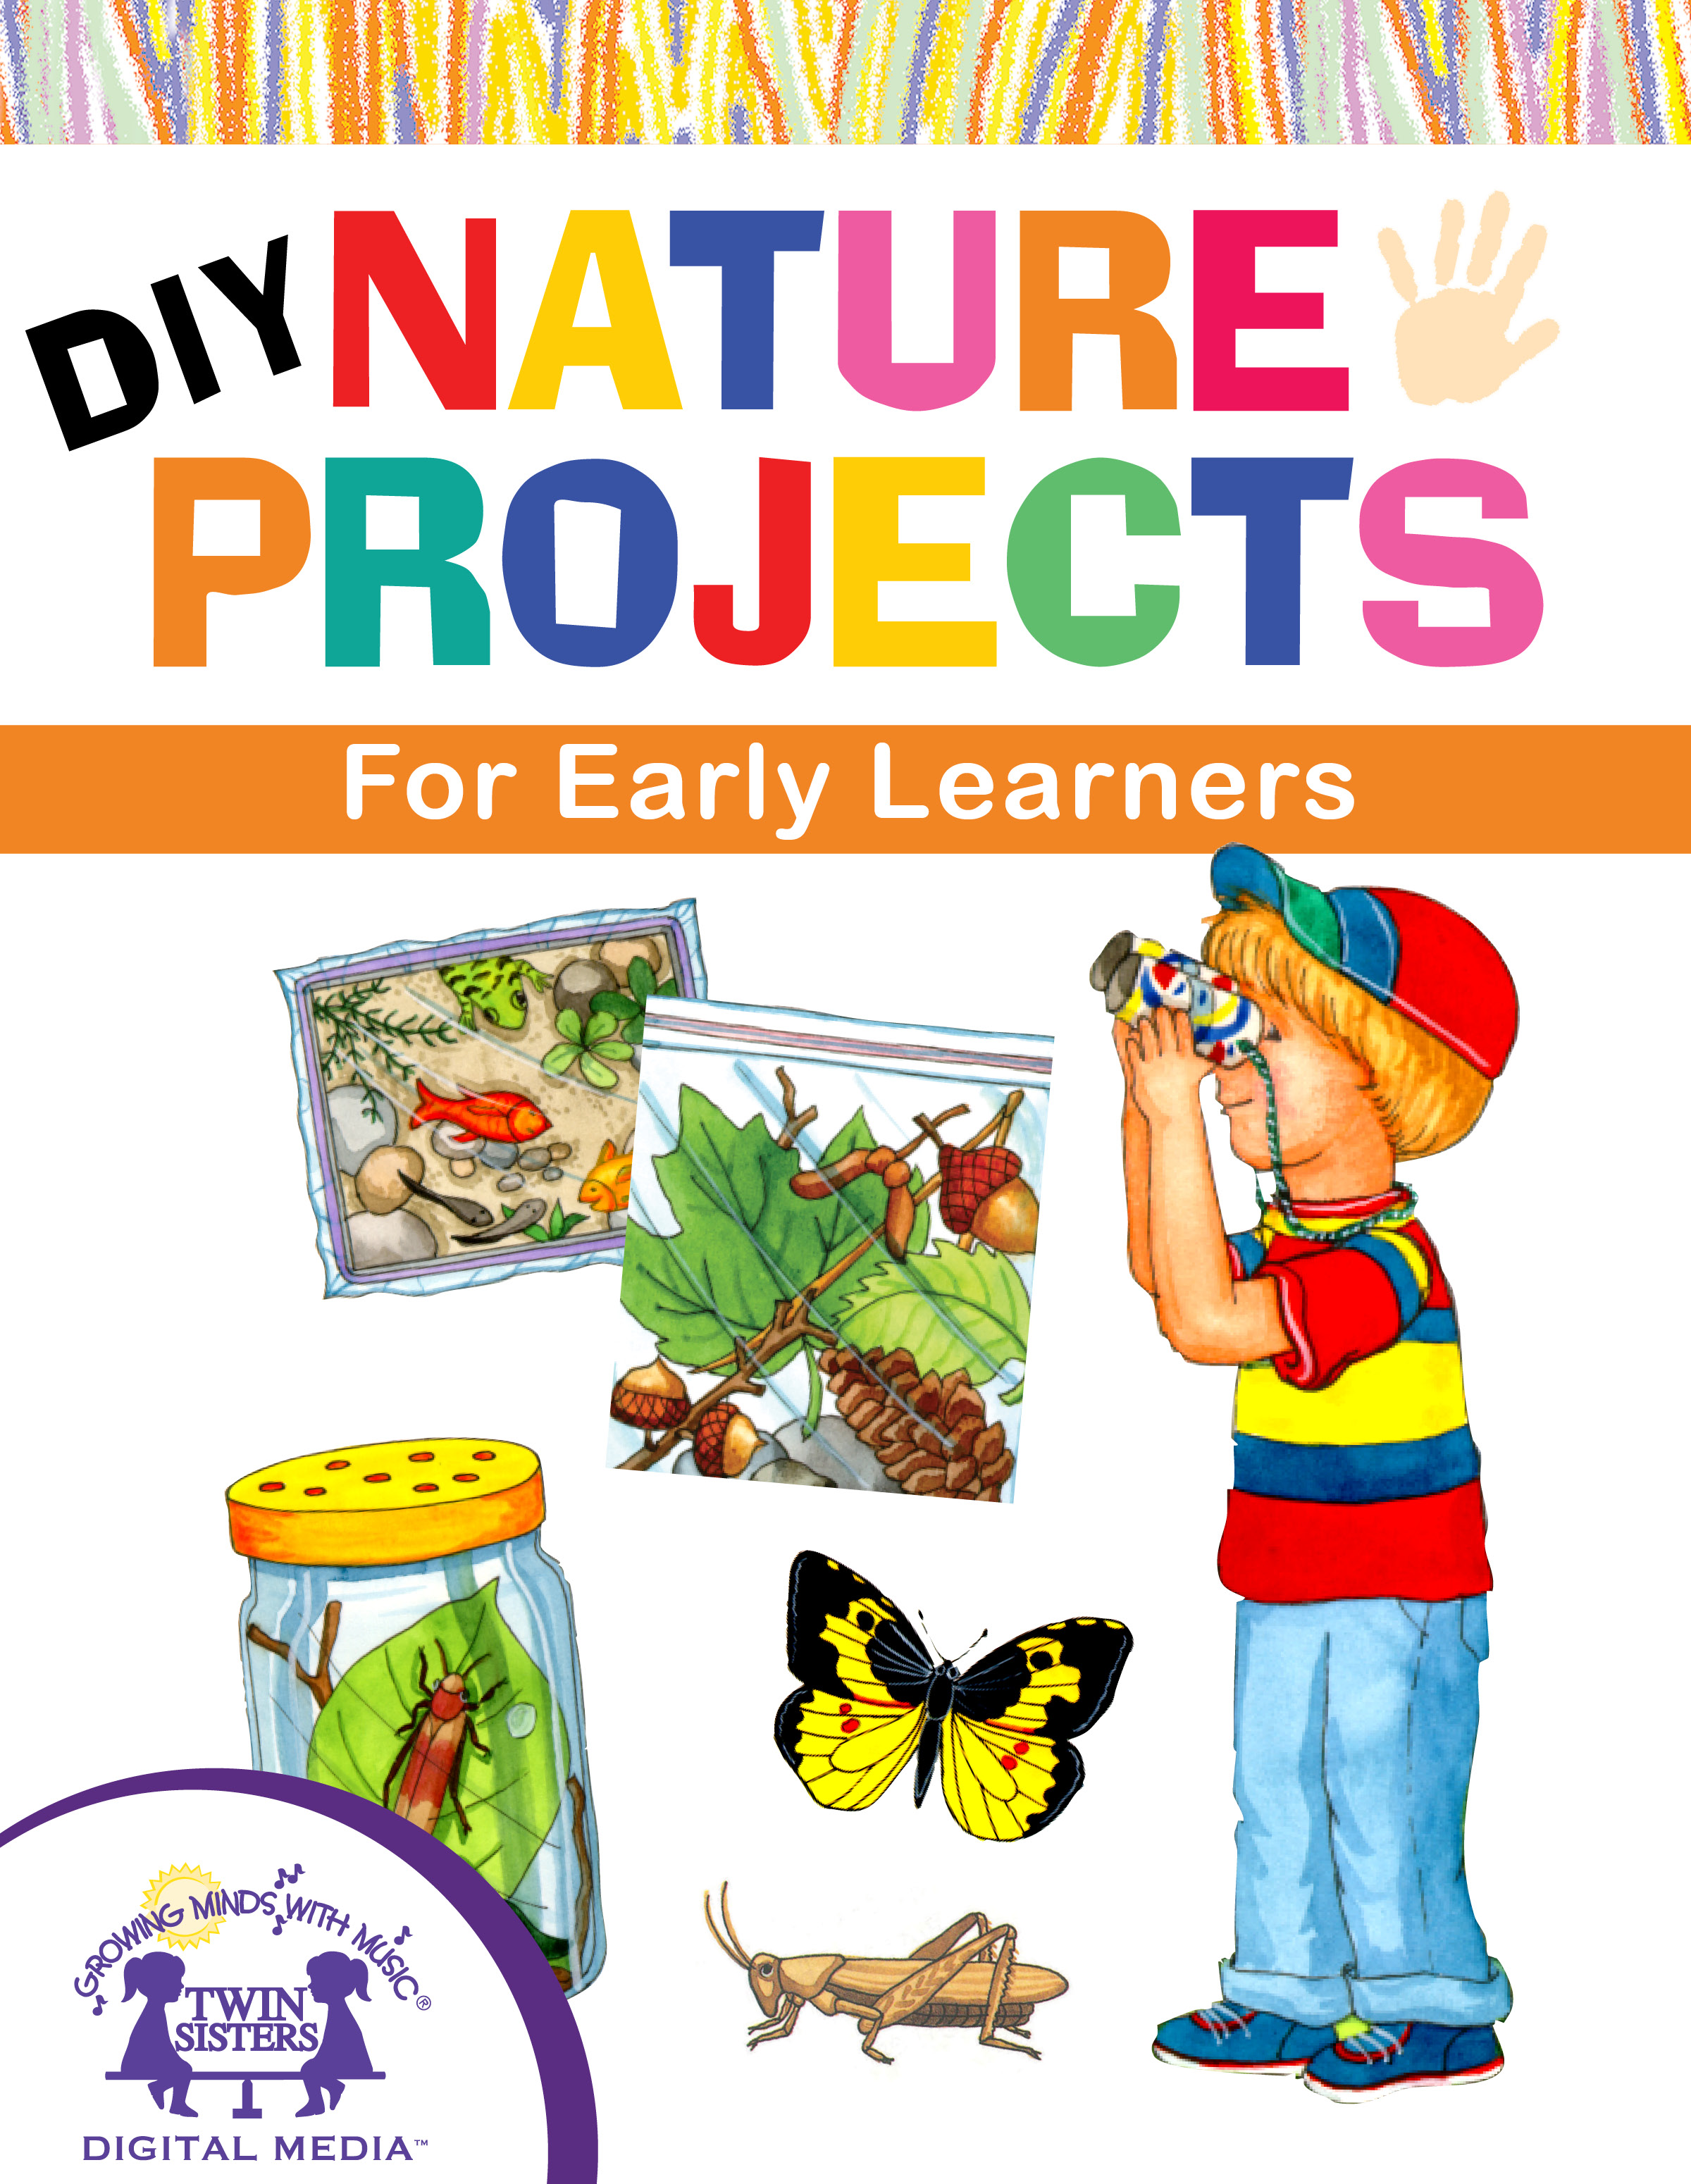 ISBN 9781620020098 product image for DIY Nature Projects for Early Learners | upcitemdb.com